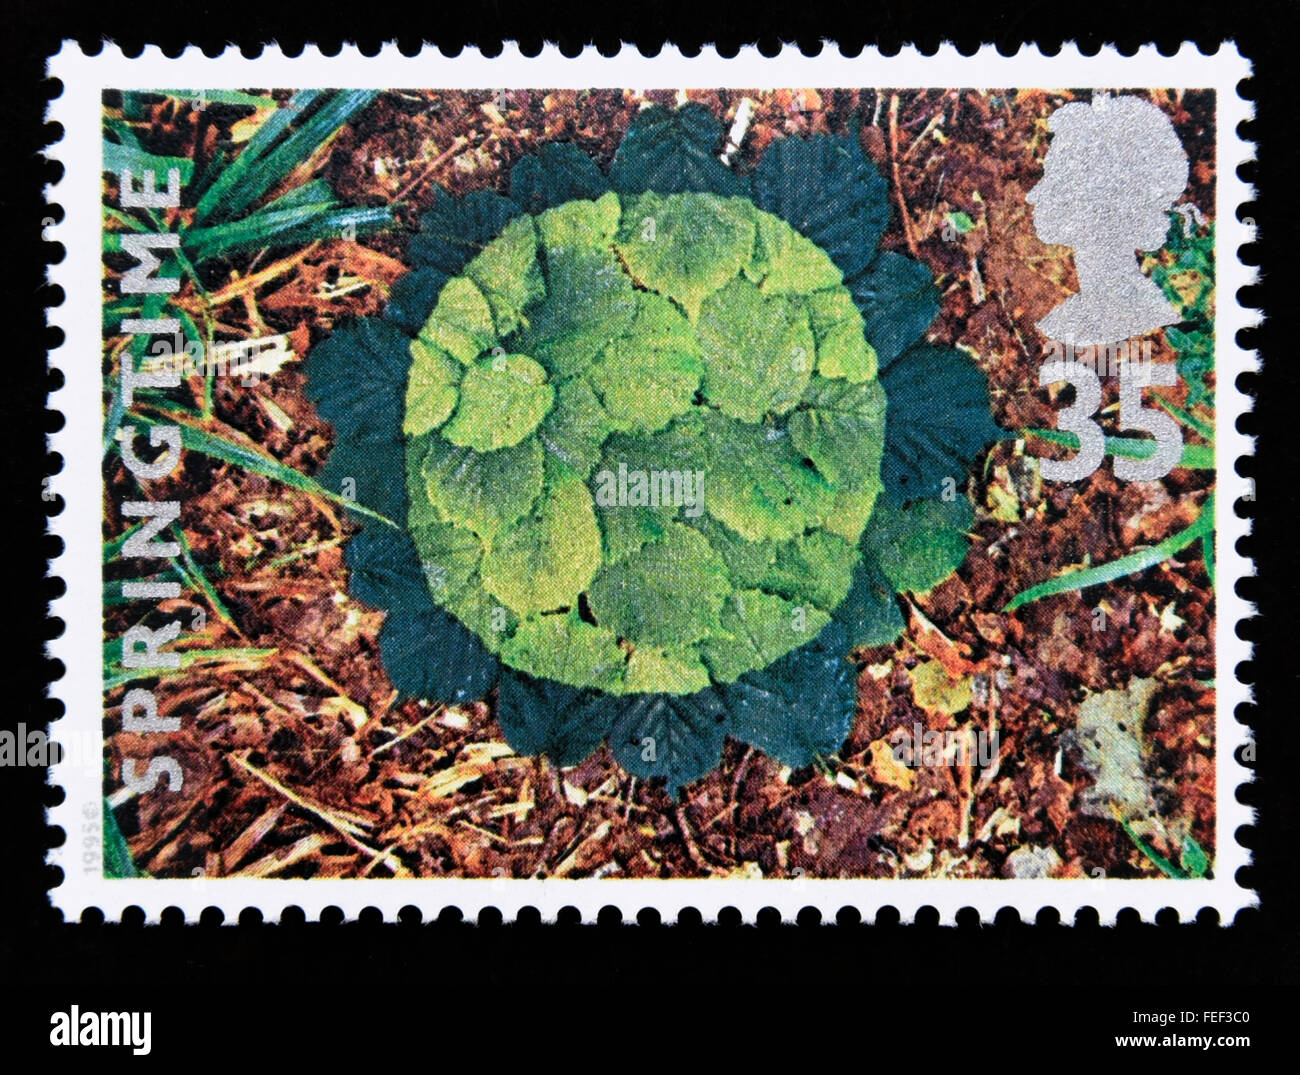 Postage stamp. Great Britain. Queen Elizabeth II. 1995. The Four Seasons. Springtime. Stock Photo